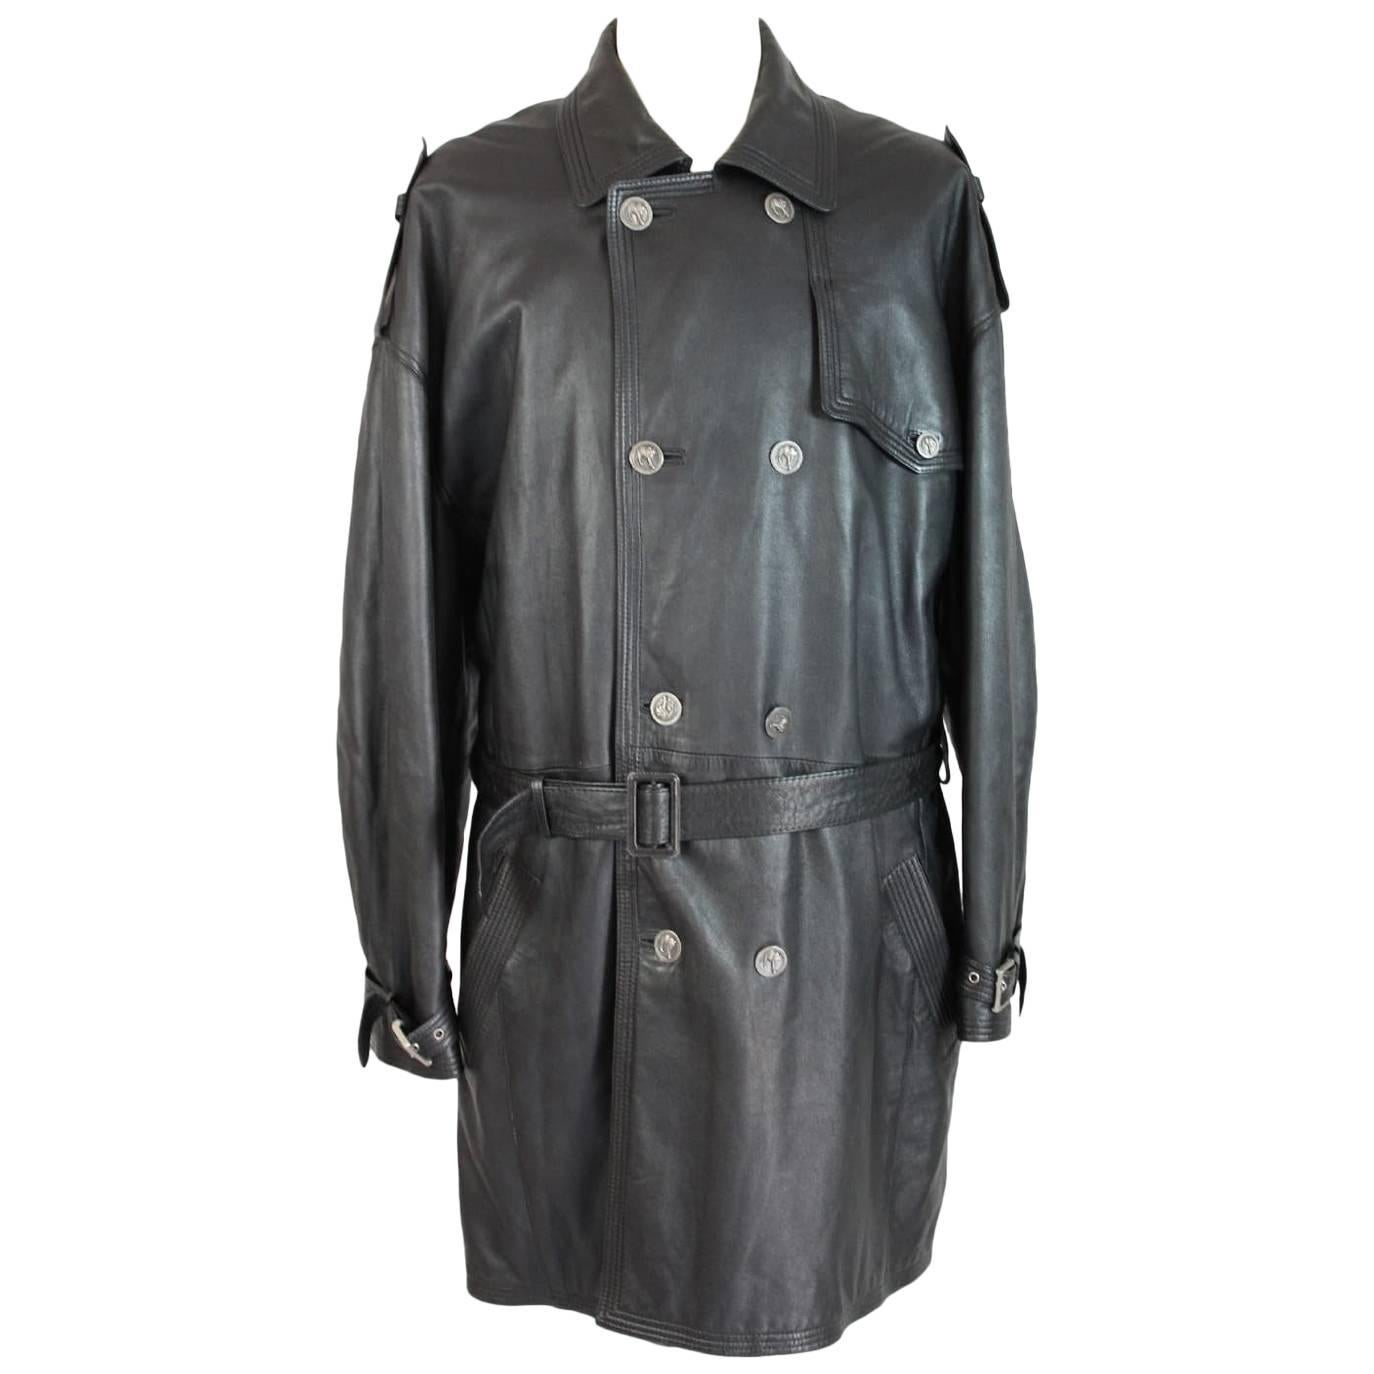 Versus Gianni Versace black leather motorcycle raincoat trench coat size 38/52 For Sale